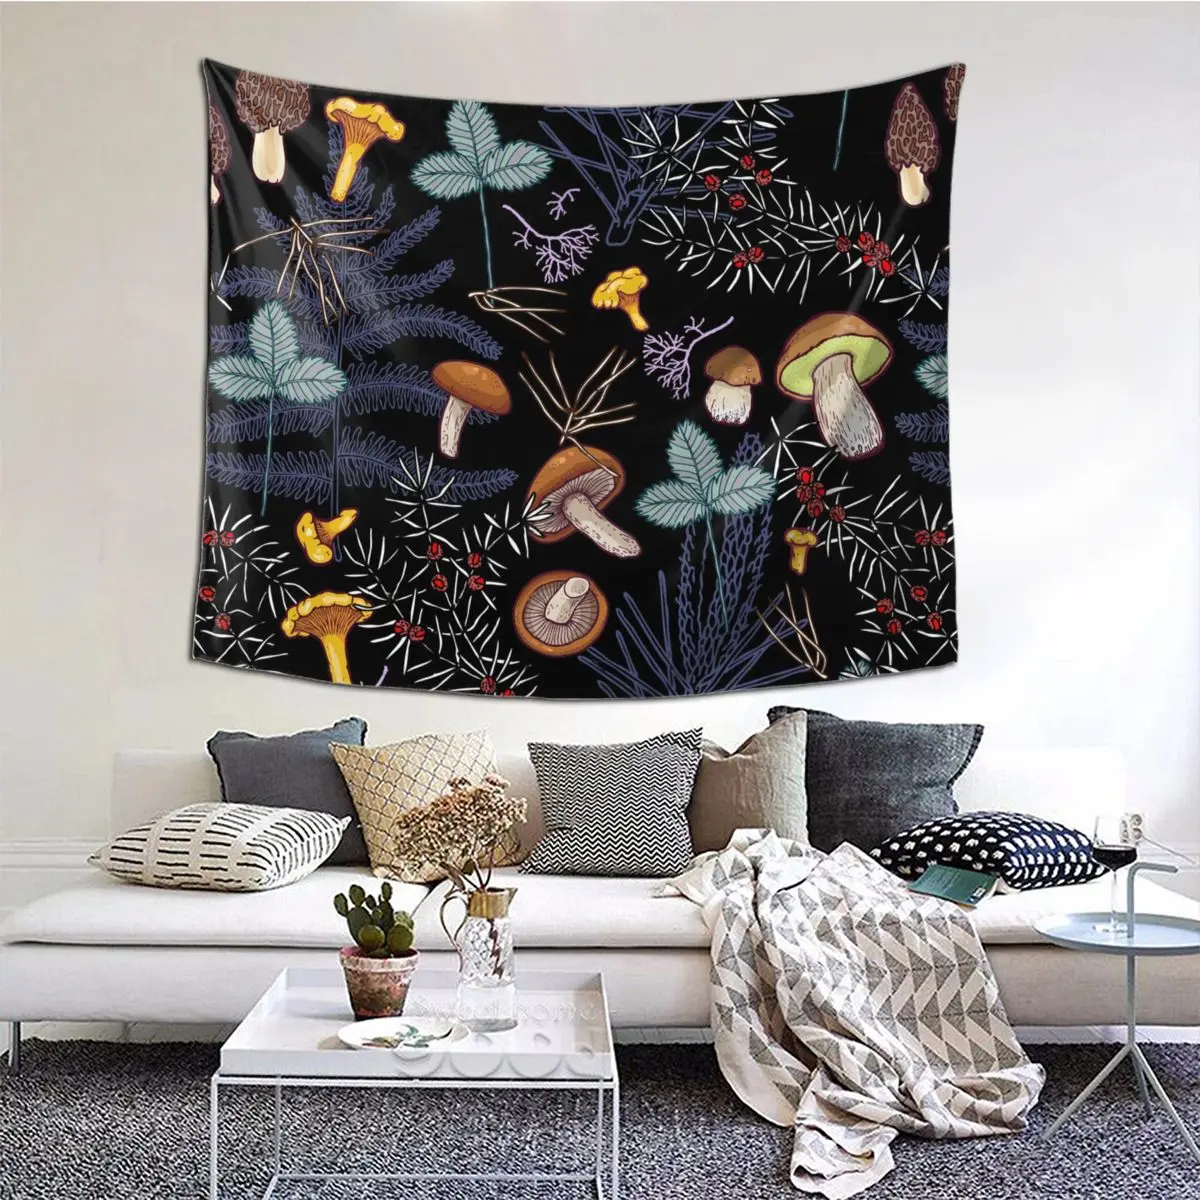 

Dark Wild Forest Mushrooms Tapestry Hippie Polyester Wall Hanging Psychedelic Wall Decor Art Wall Tapestry 95x73cm